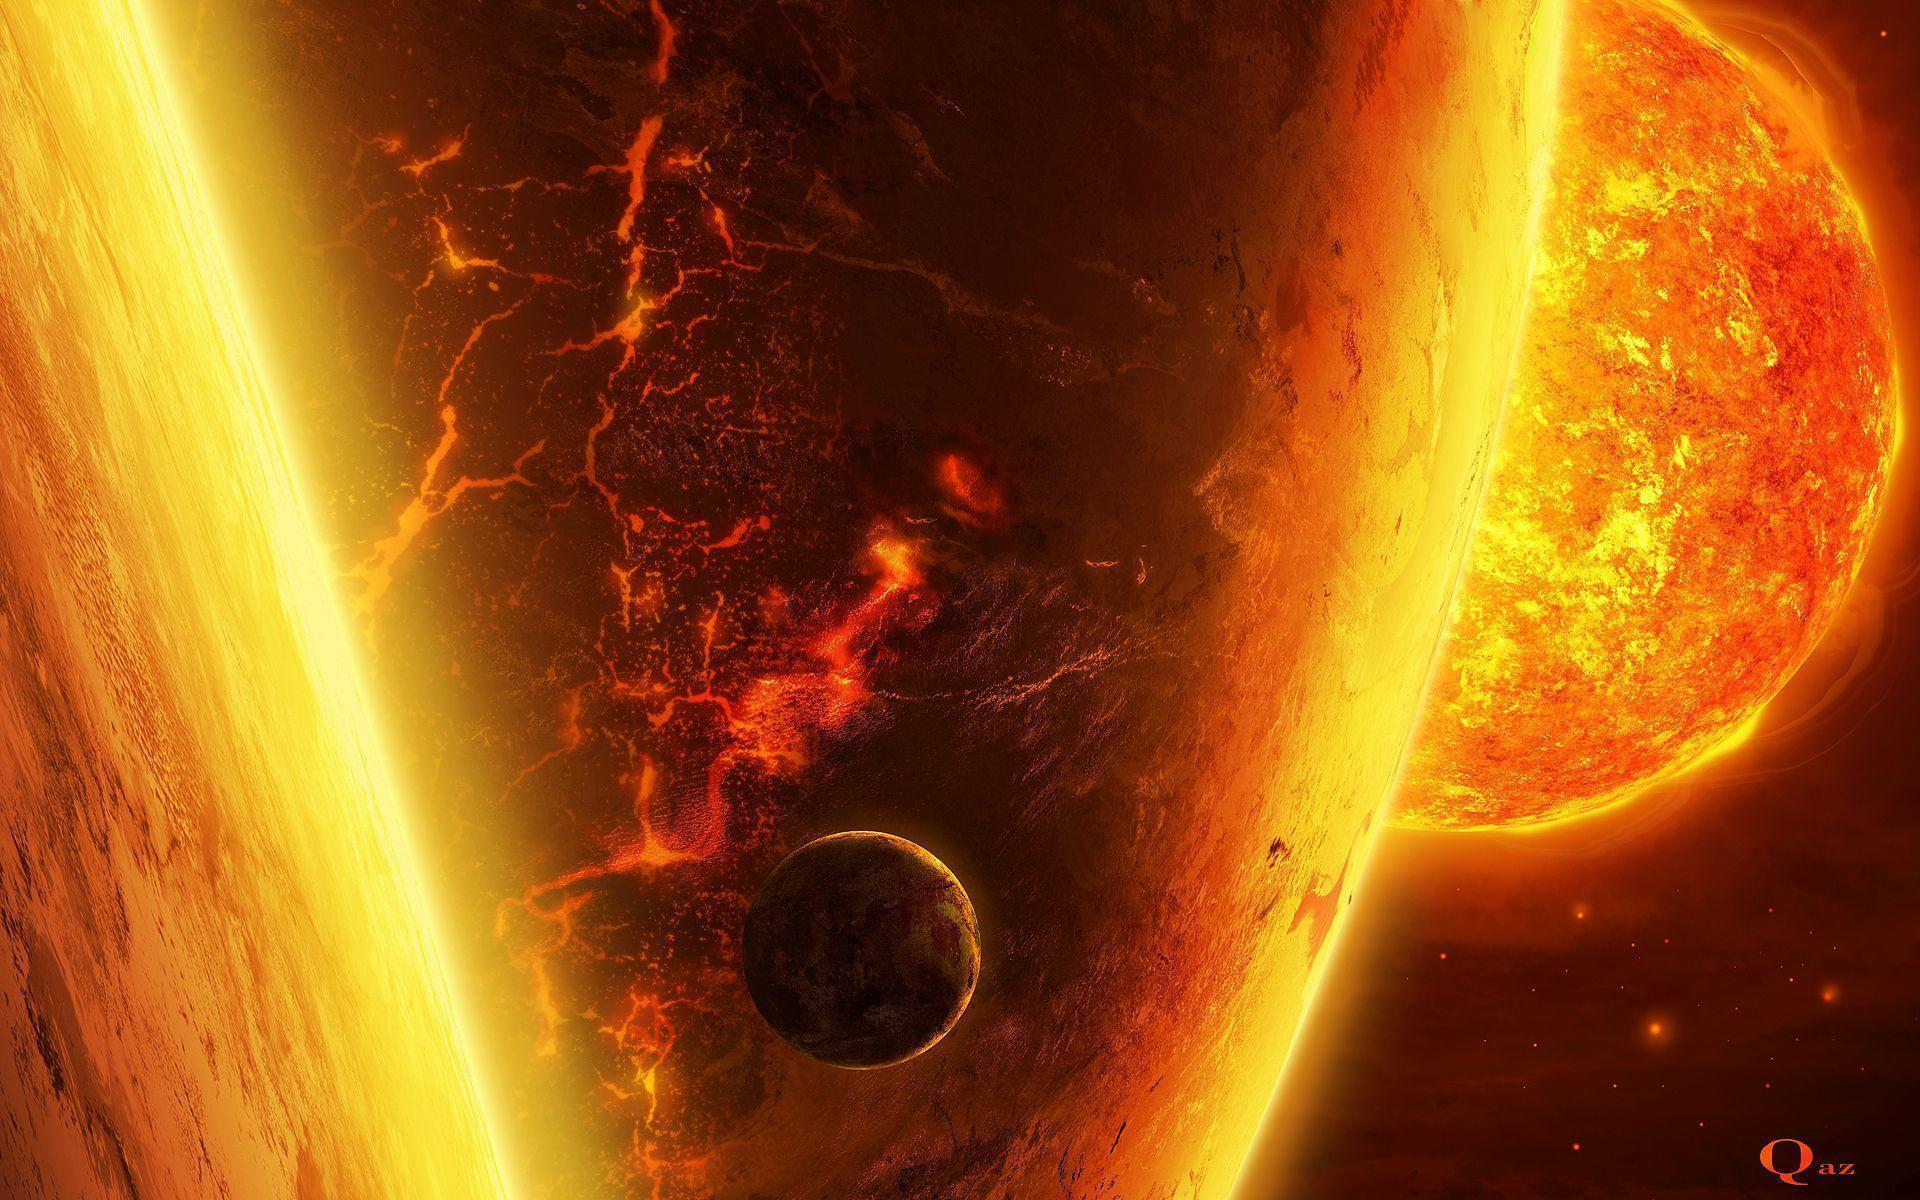 The planet is near the sun wallpaper and image